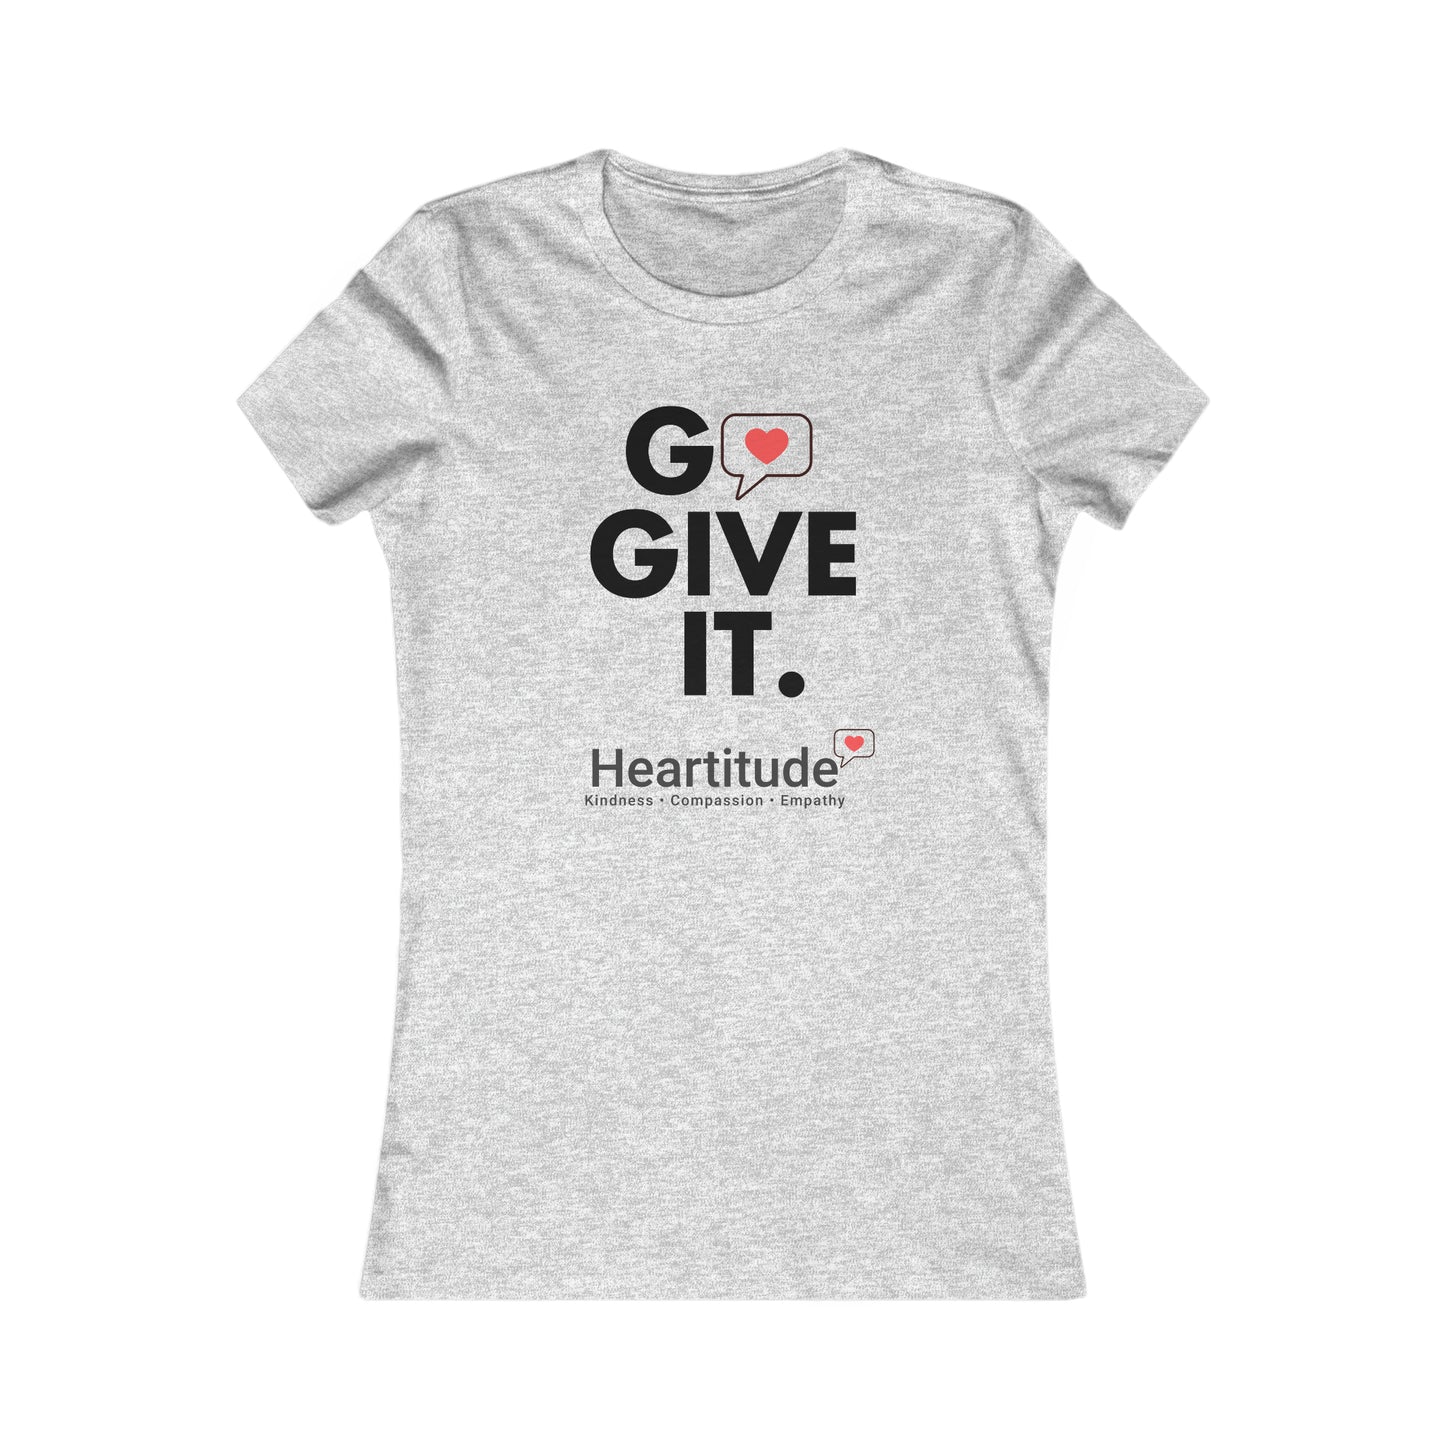 Go Give It Women's Short Sleeve Shirt (50% to charity)